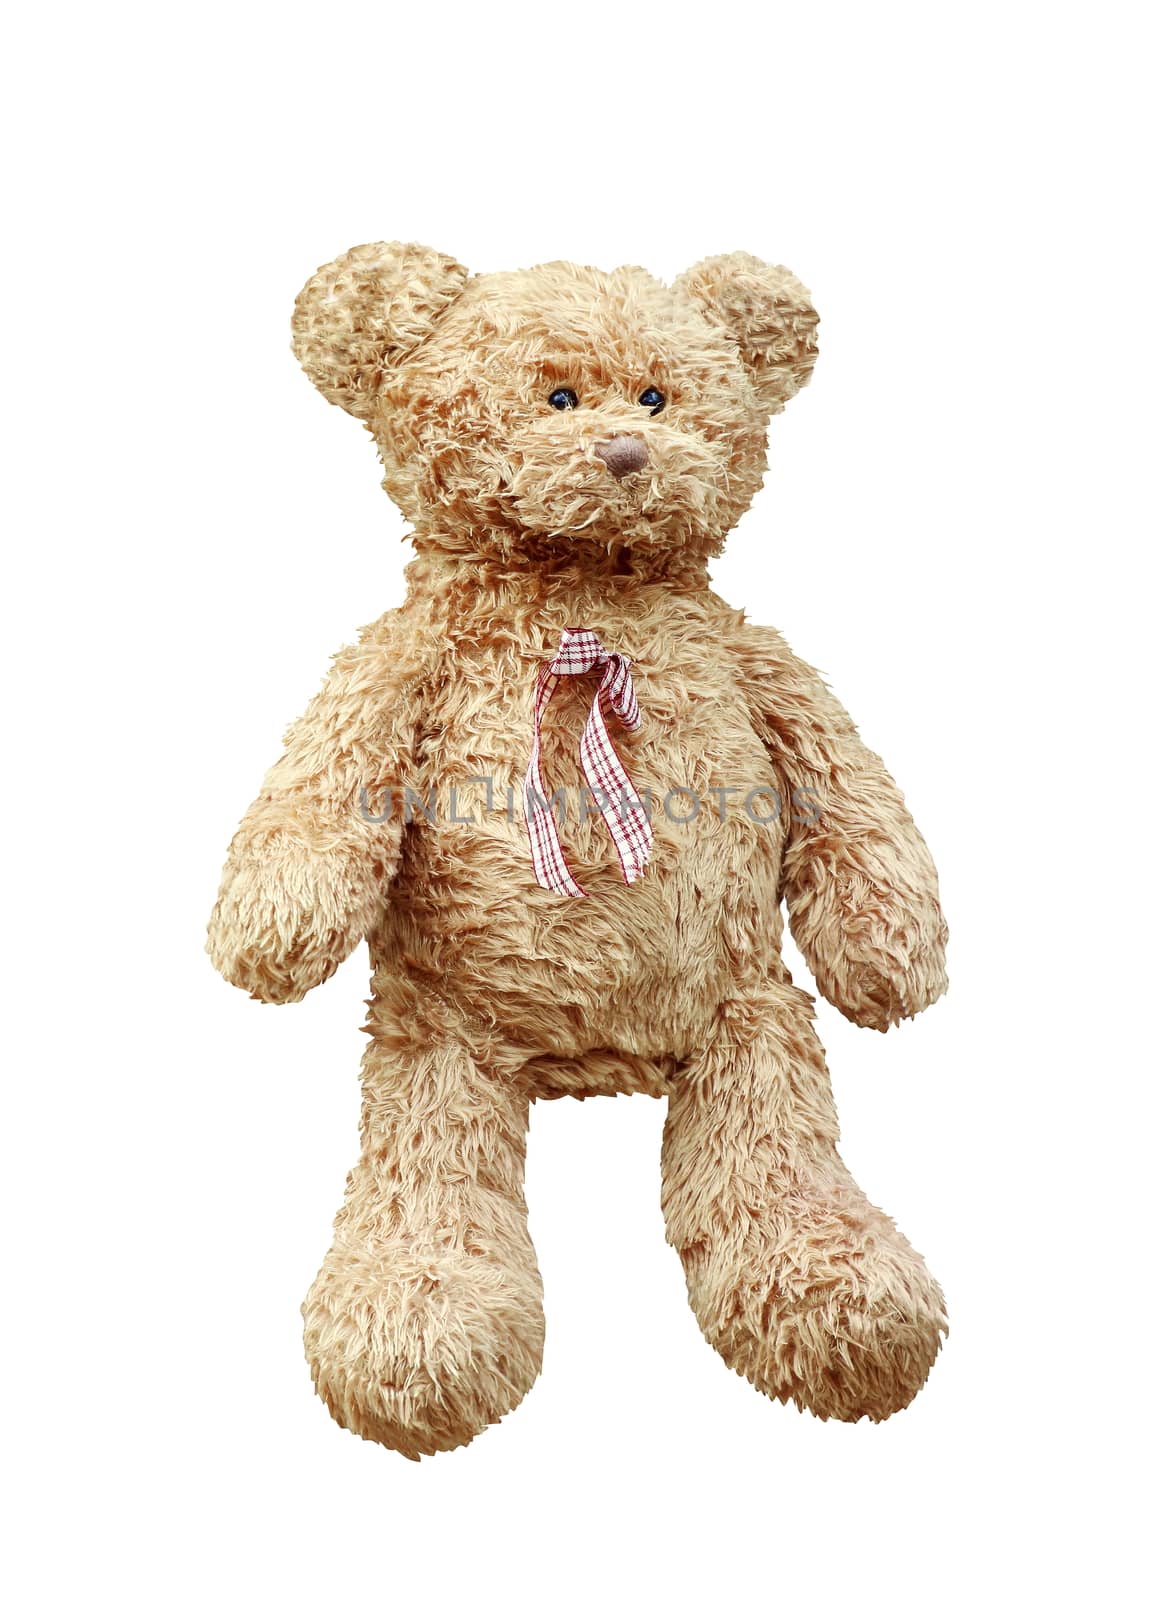 Teddy Bear brown, Teddy Bear doll isolated on white background by cgdeaw